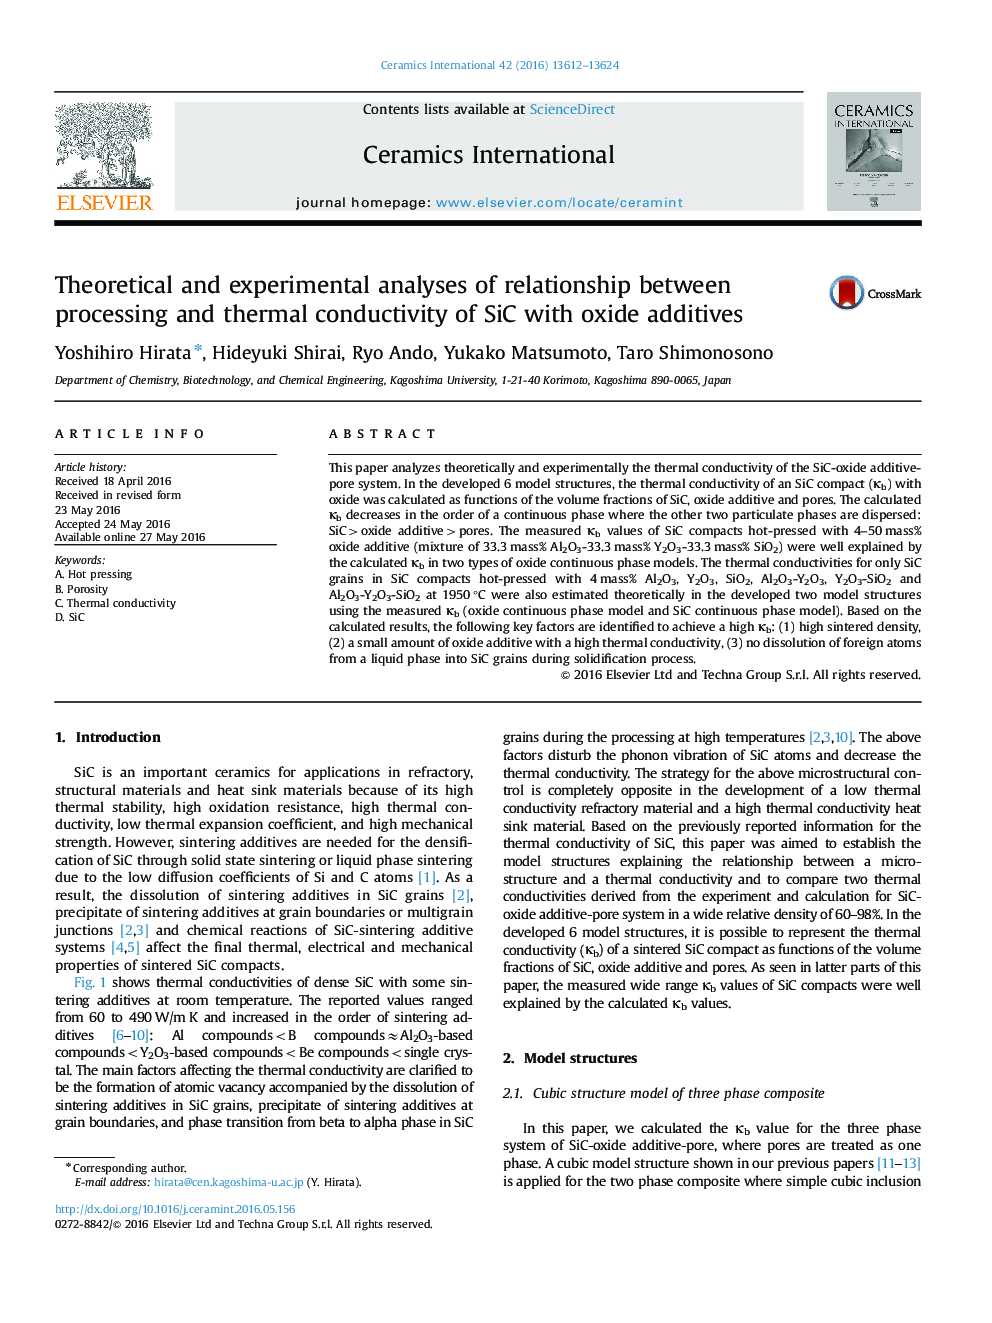 Theoretical and experimental analyses of relationship between processing and thermal conductivity of SiC with oxide additives